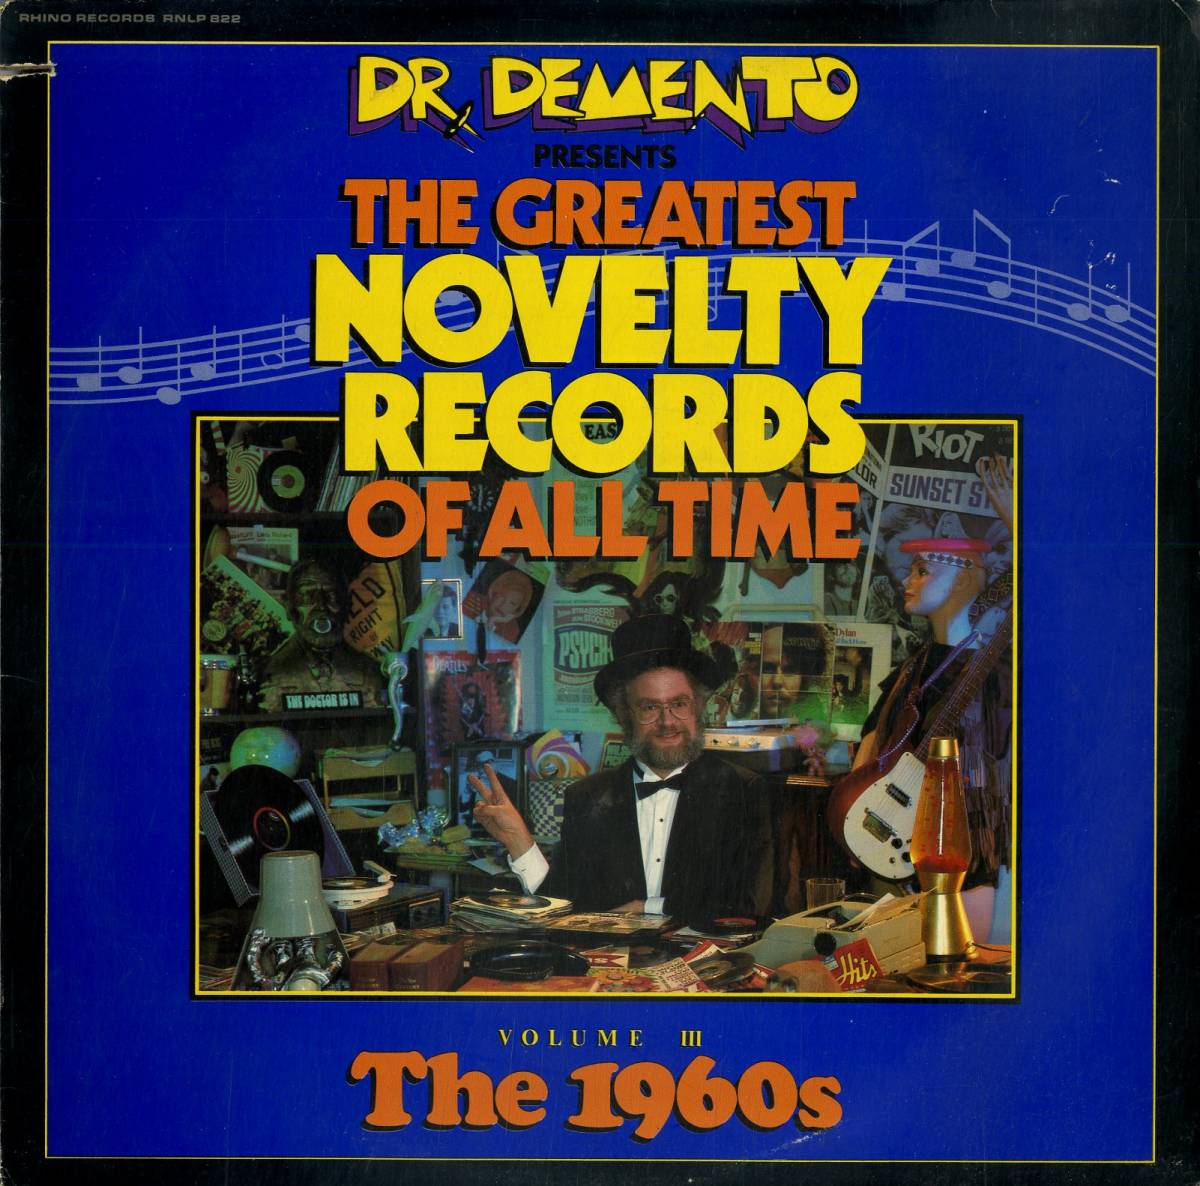 A00483836/LP/V.A.「Dr.Demento Presents The Greatest Novelty Records Of All Time Volume III The 1960s (1985年・RNLP-822・パロディ_画像1